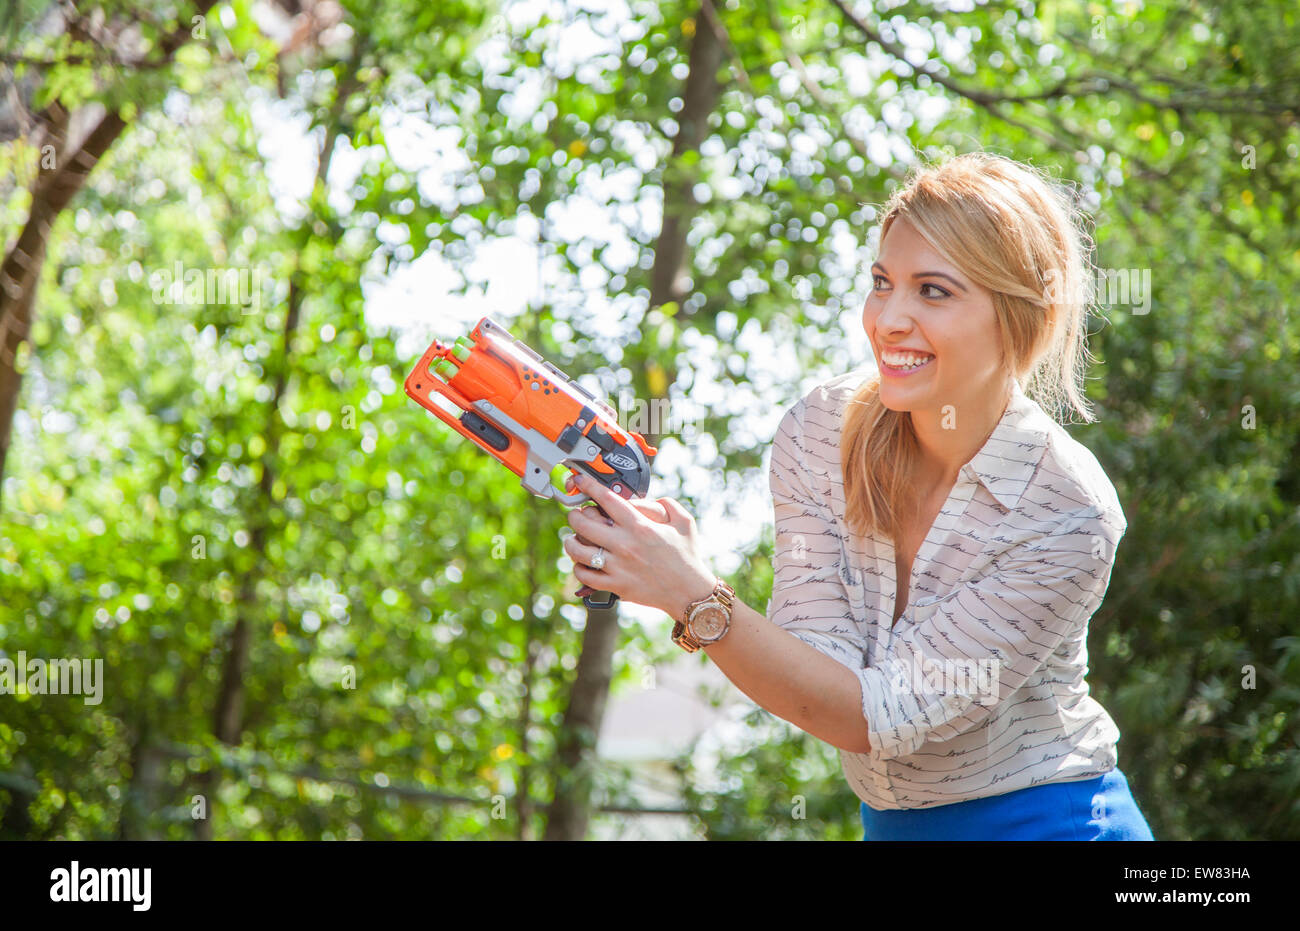 Young woman playing with nerf guns in park in Florida Stock Photo